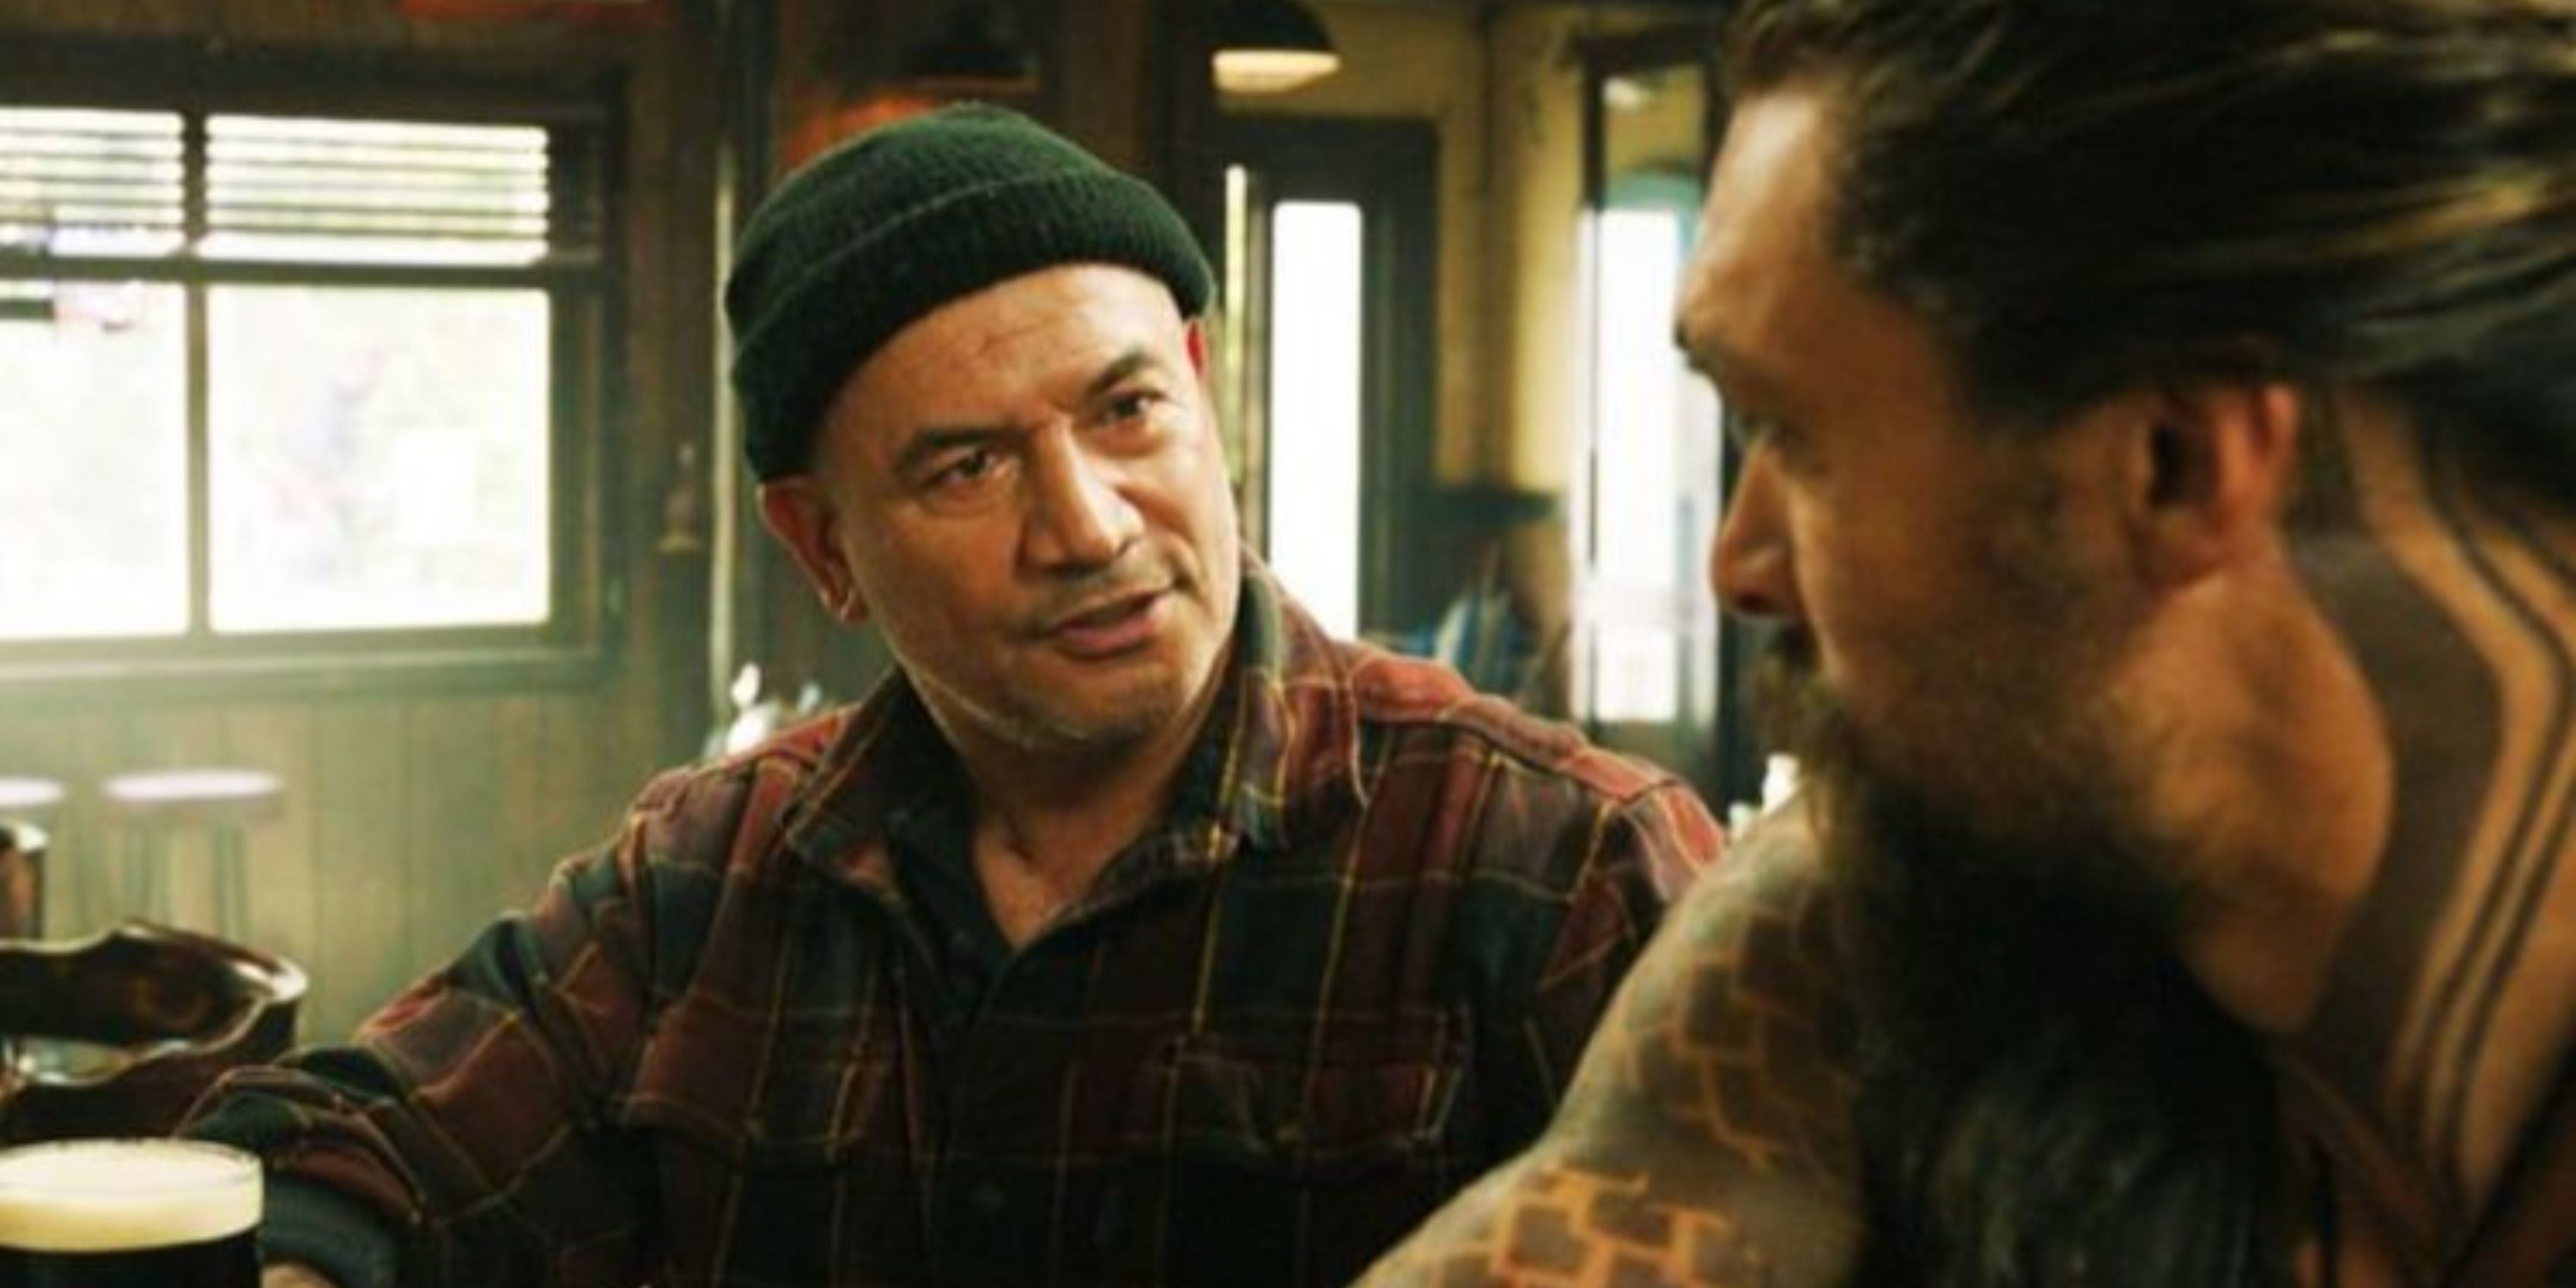 temuera morrison thomas curry talking to his son arthur curry played by jason momoa